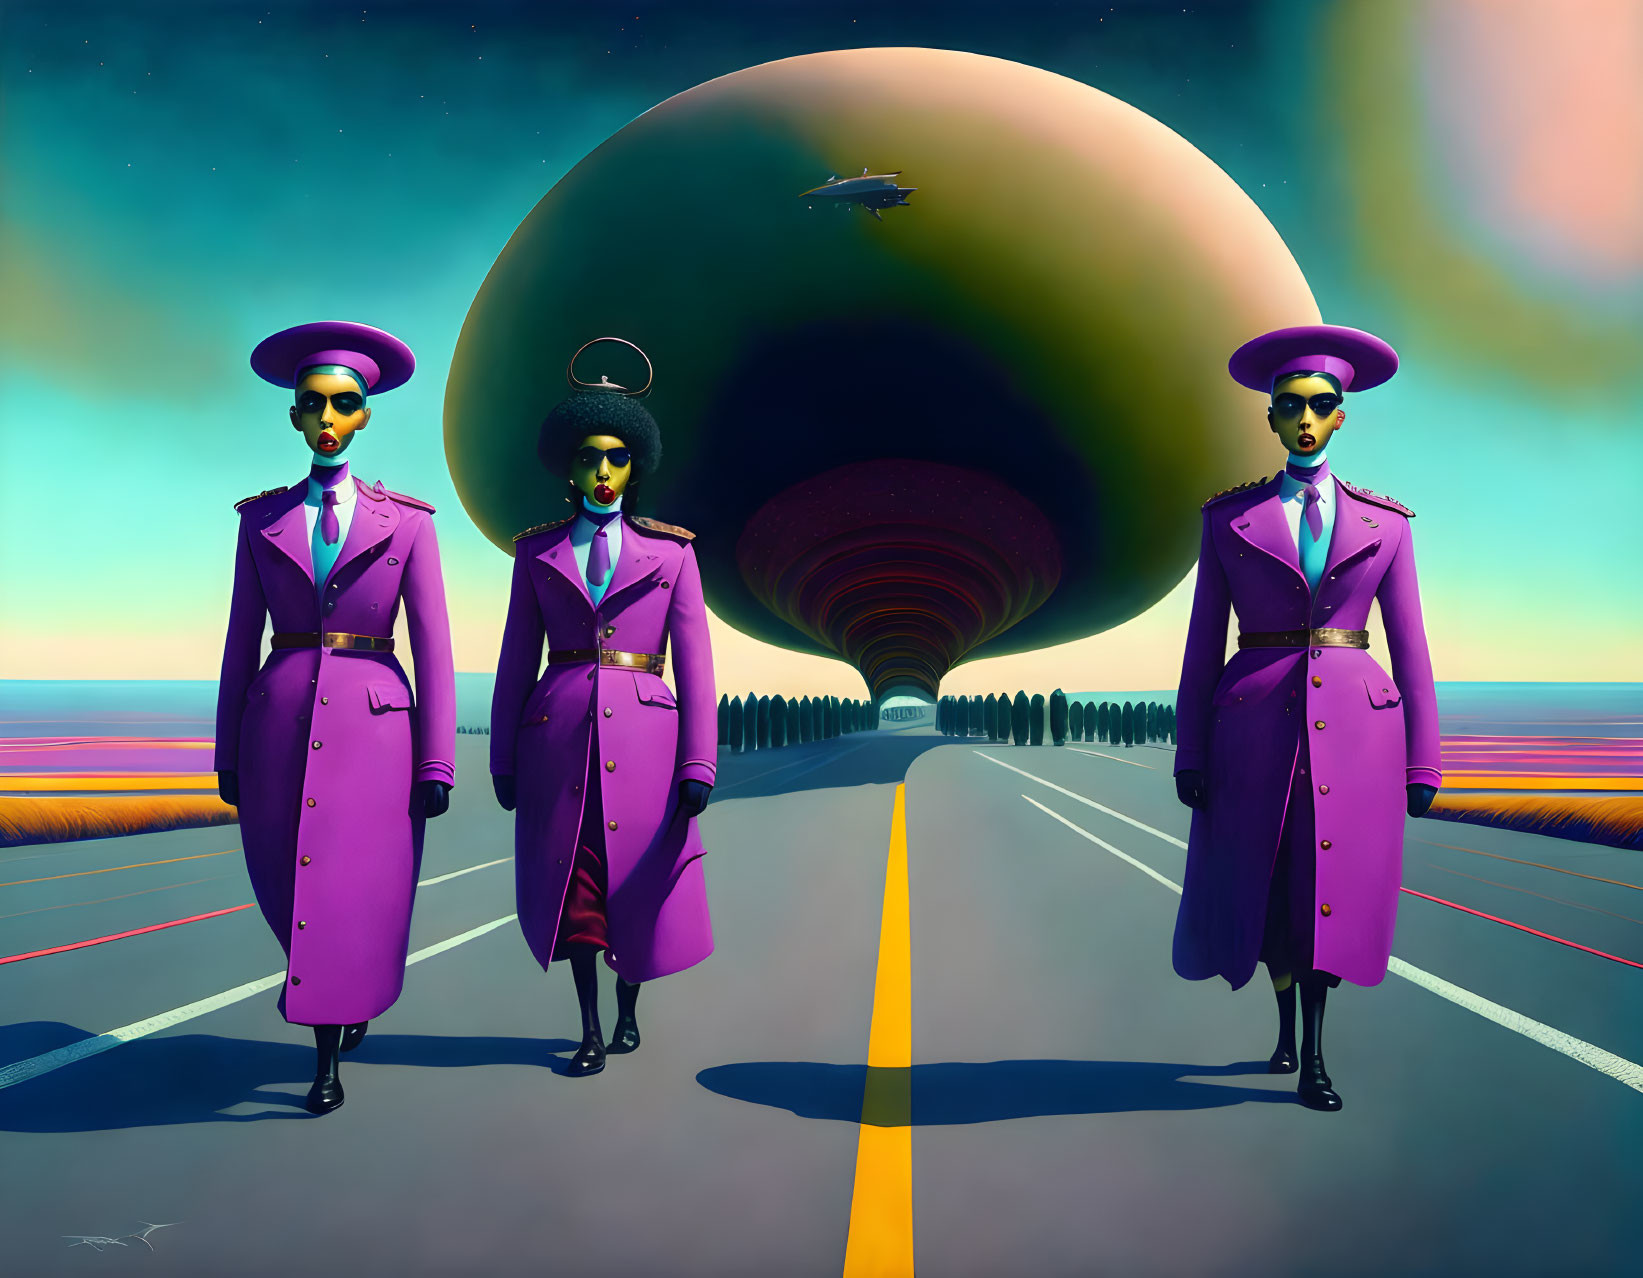 Identical Figures in Purple Coats and Hats on Road with Large Planet and Flying Saucer